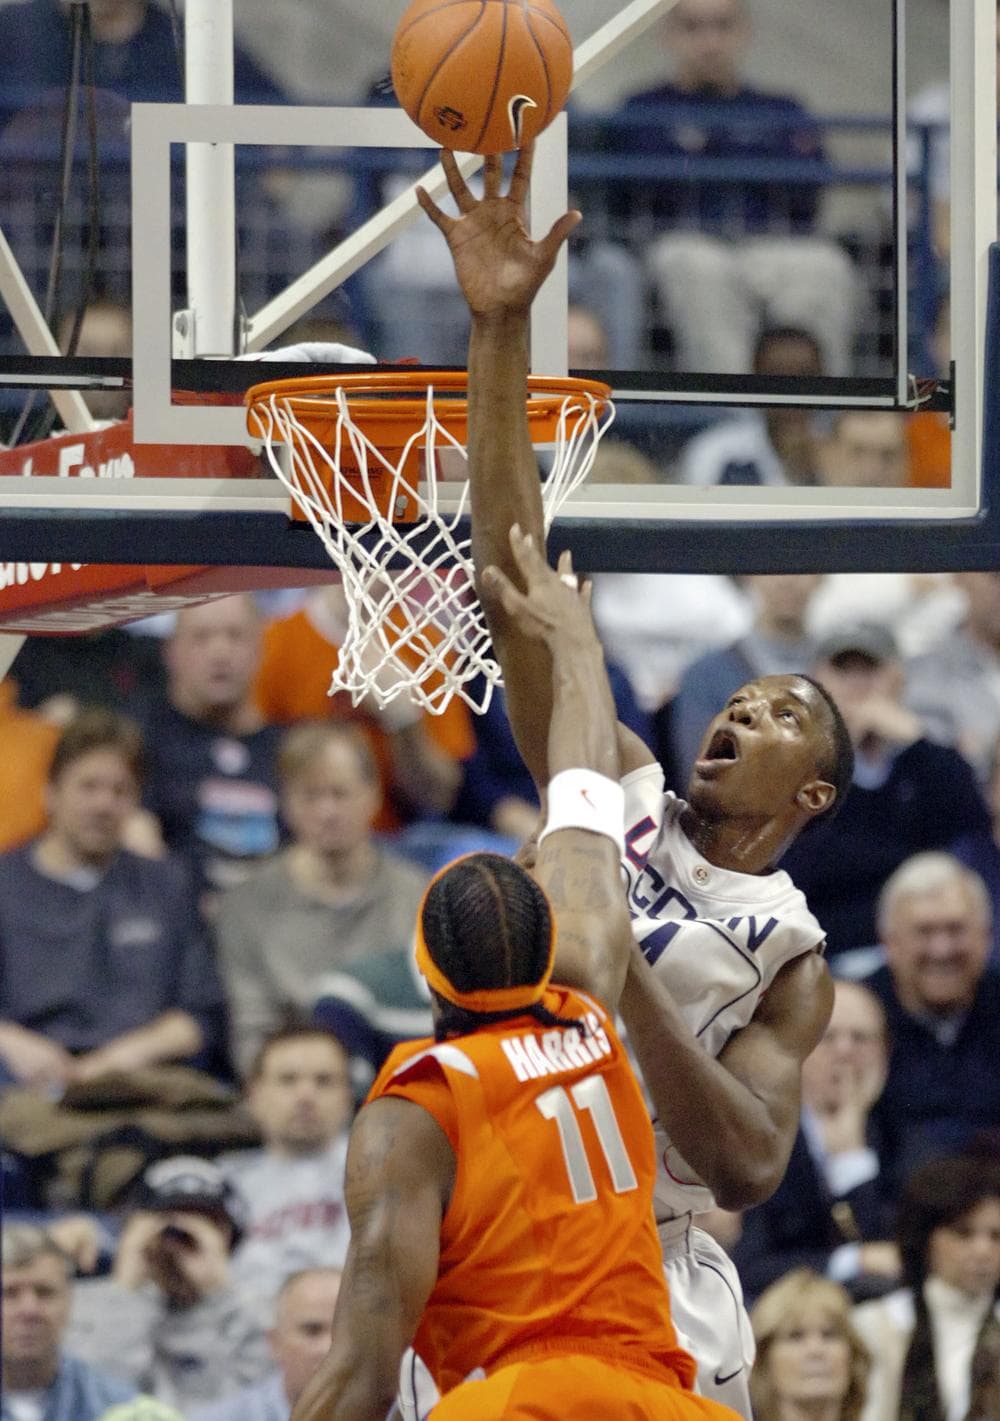 Connecticut's Hasheem Thabeet, right, blocks the shot of Syracuse's Paul Harris during the NCAA college basketball game in Conn., on Feb. 11, 2009.  (AP)